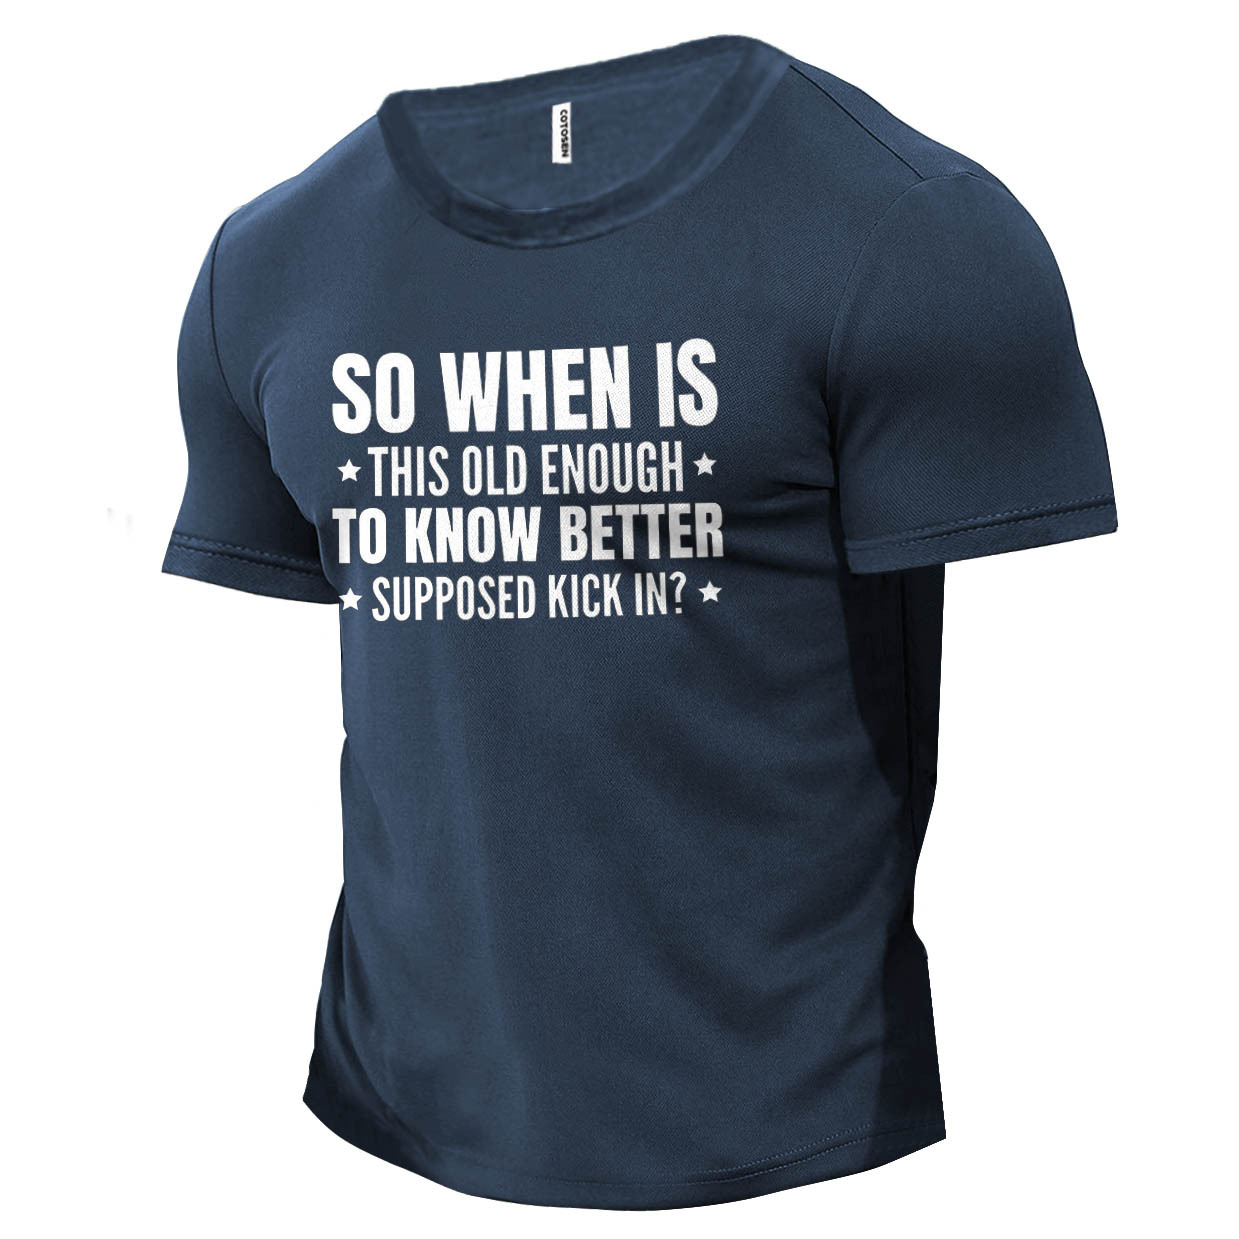 Men's So When Is Chic This Old Enough To Know Better Supposed Kick In Cotton T-shirt